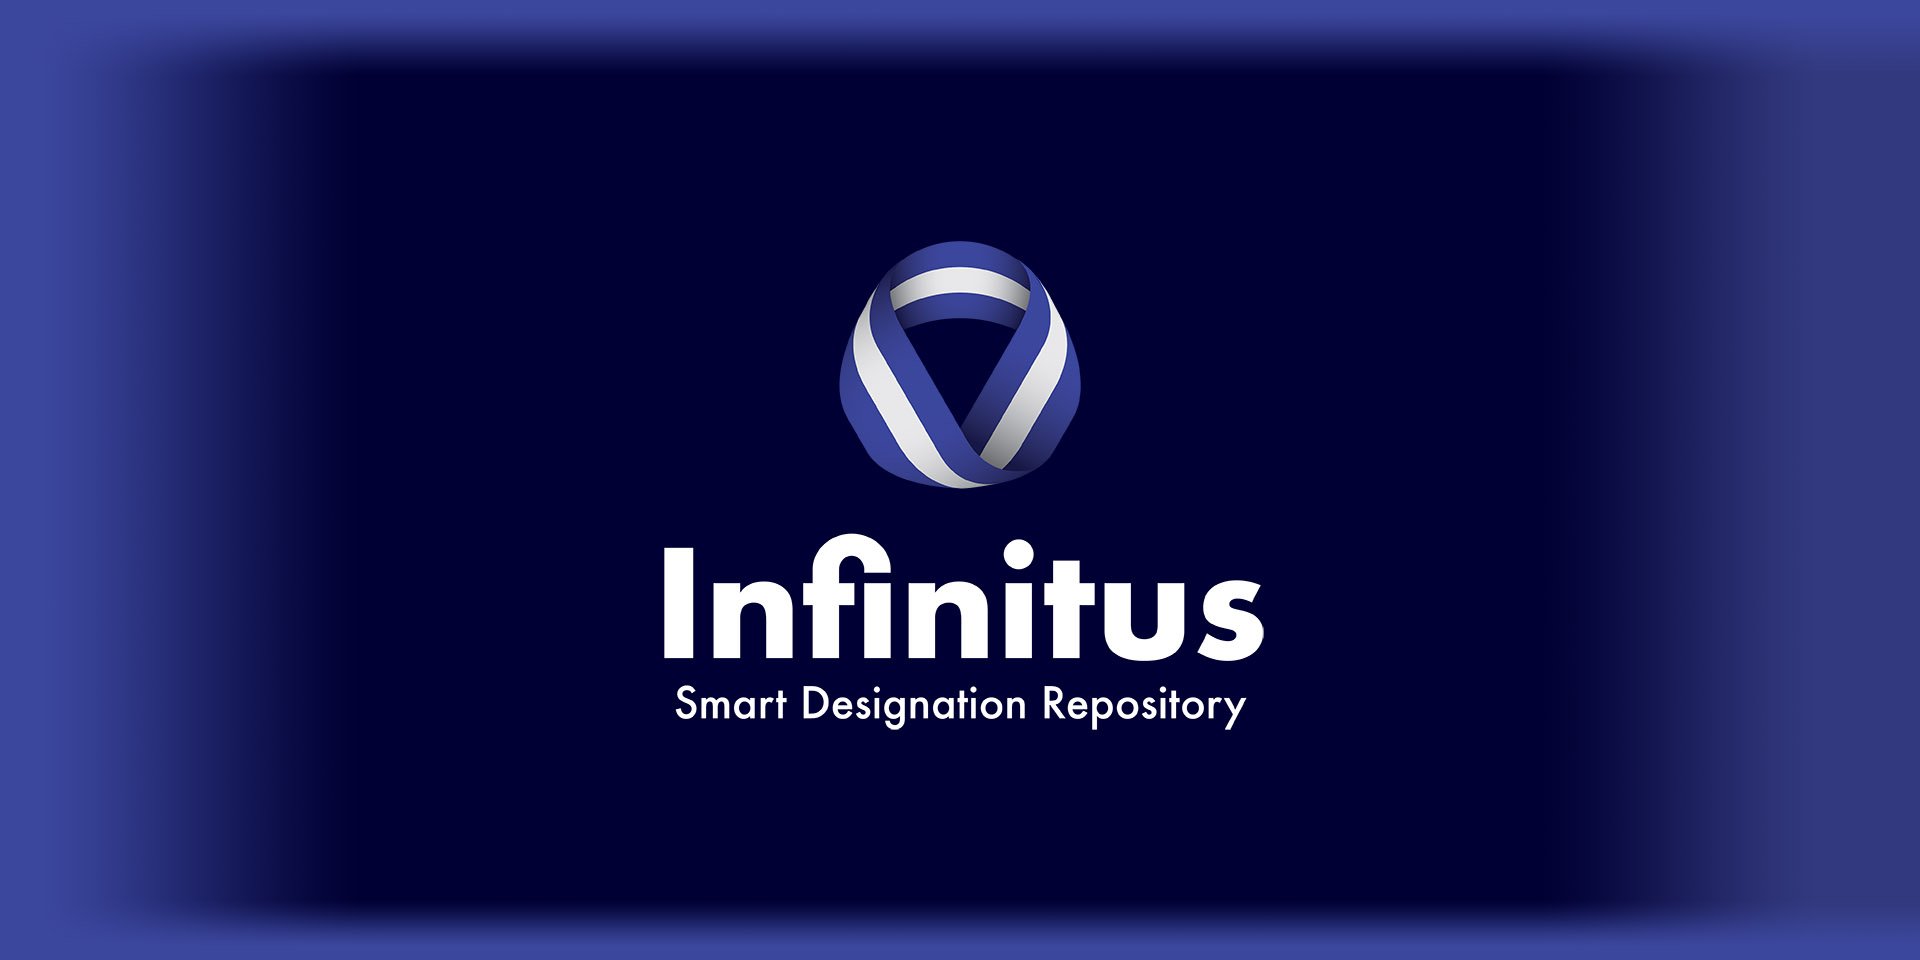 Infinitus Has Just Created the Solution to Cryptocurrency's Biggest Problem